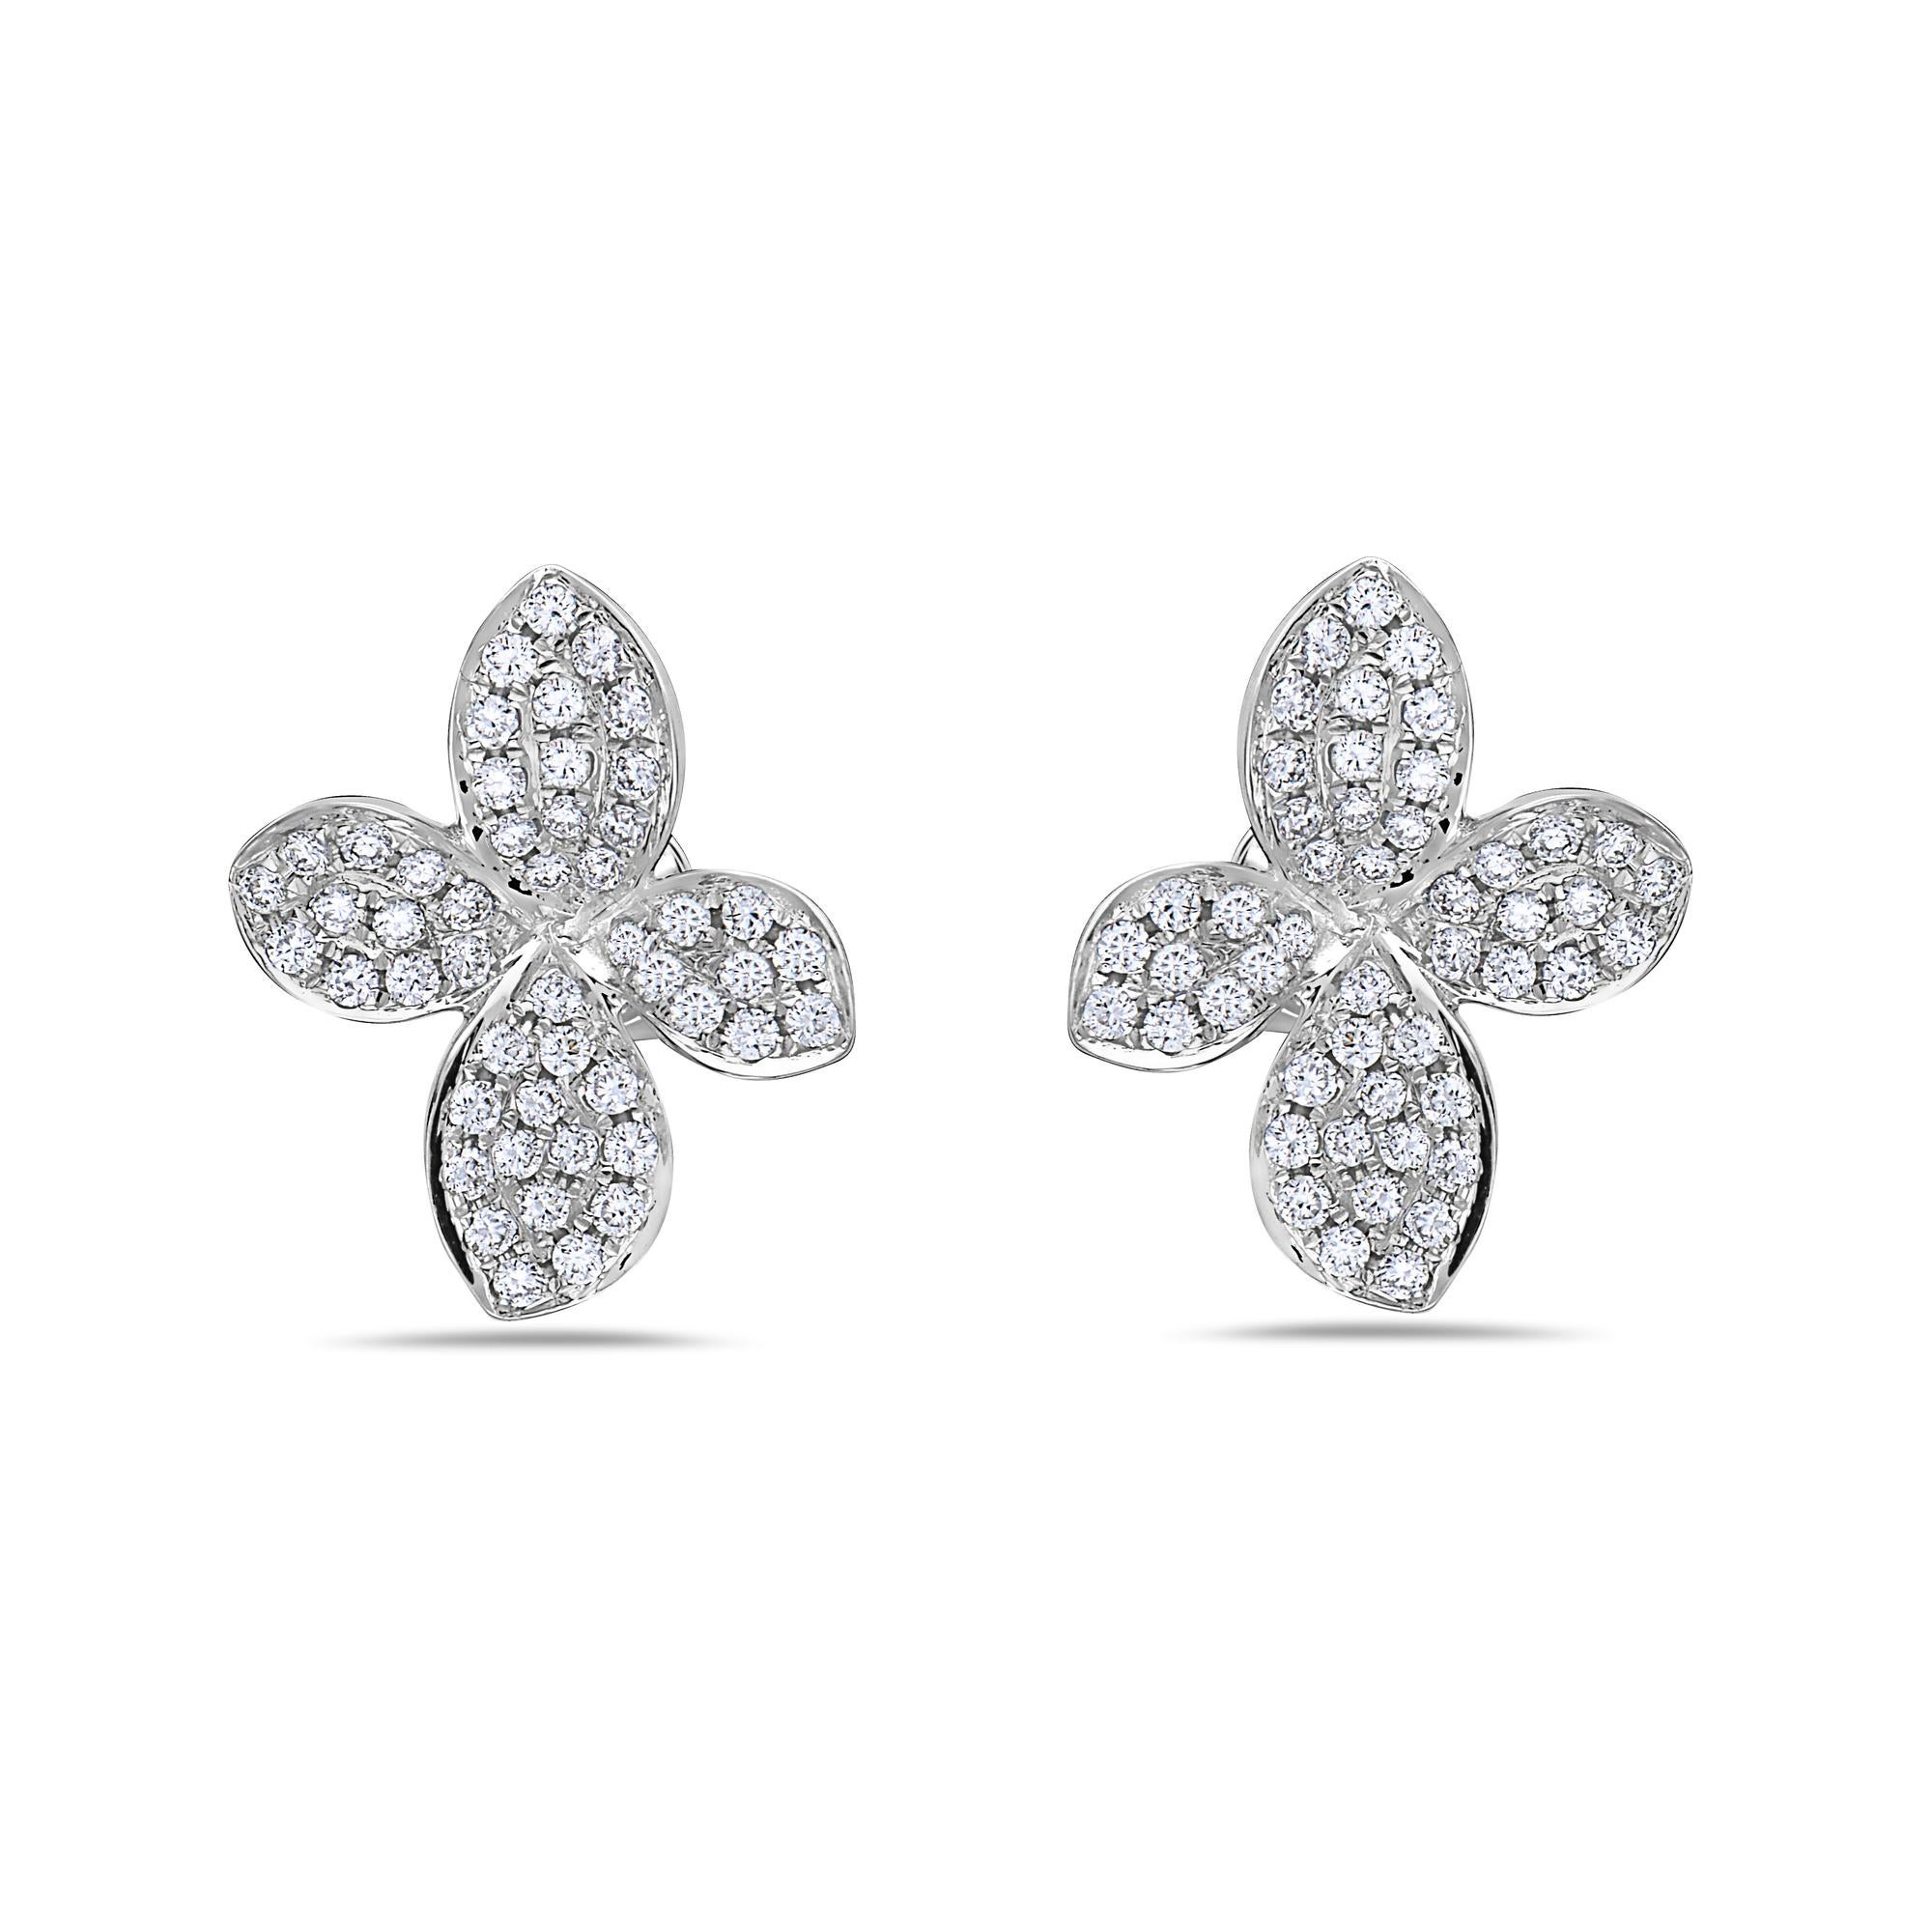 The Afarin Collection Pavé Petite Garden Diamond Stud Earrings feature 49 Round Brilliant Cut Diamonds totaling 0.68 cts t.w. featured in 18K White Gold.
All The Diamonds are F in Color, VS in Clarity,
Excellent Make and Polish,
These Earrings